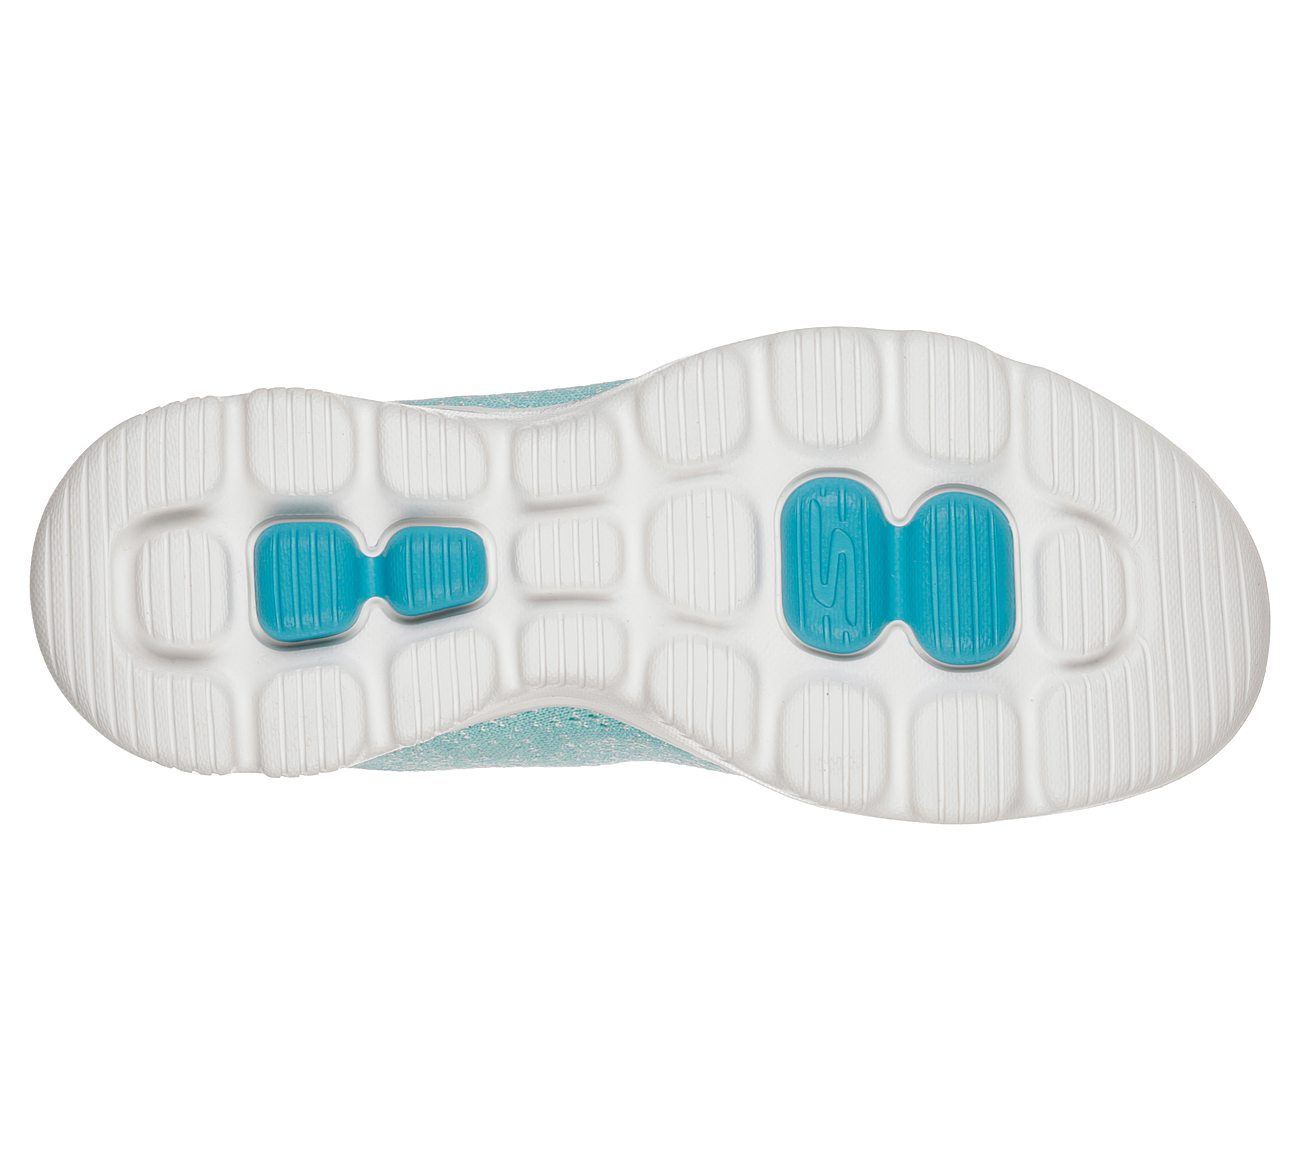 Skechers Turquoise Go Walk Evolution Ultra Mirab Lace Up Shoes For Women -  Style ID: 15736